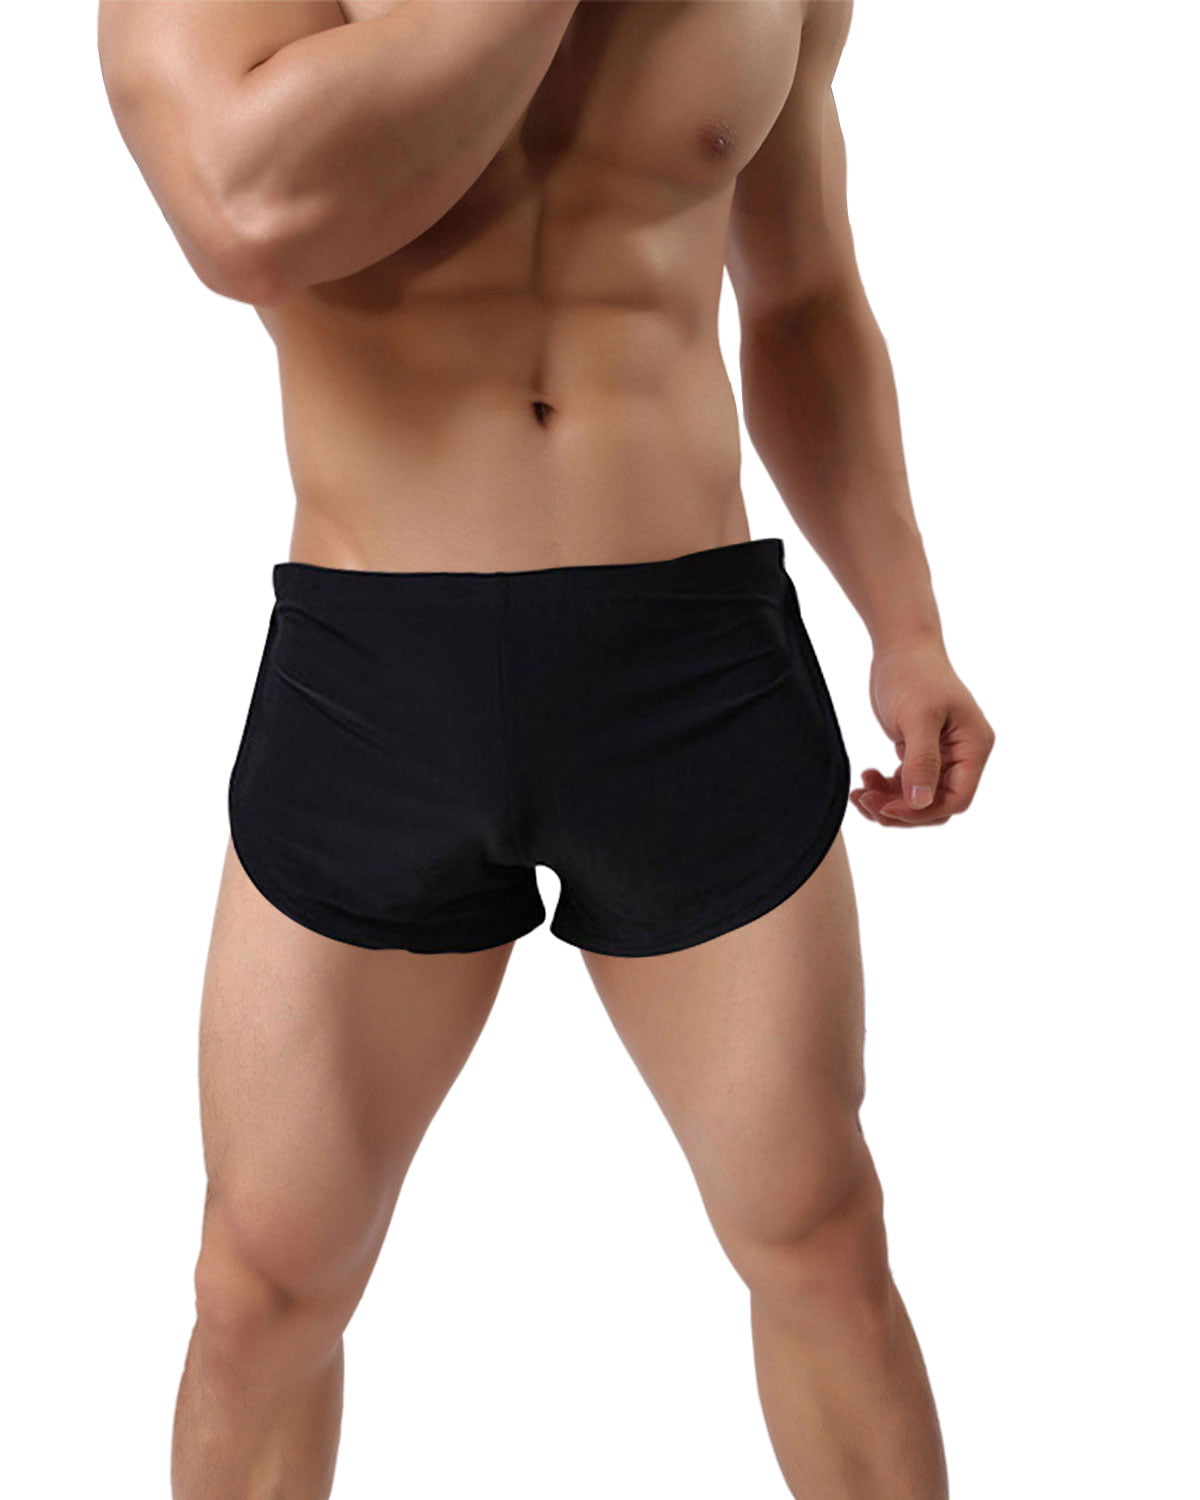 Glakc Mens Underwear Soft and Comfortable Boxer Stretch Pants 